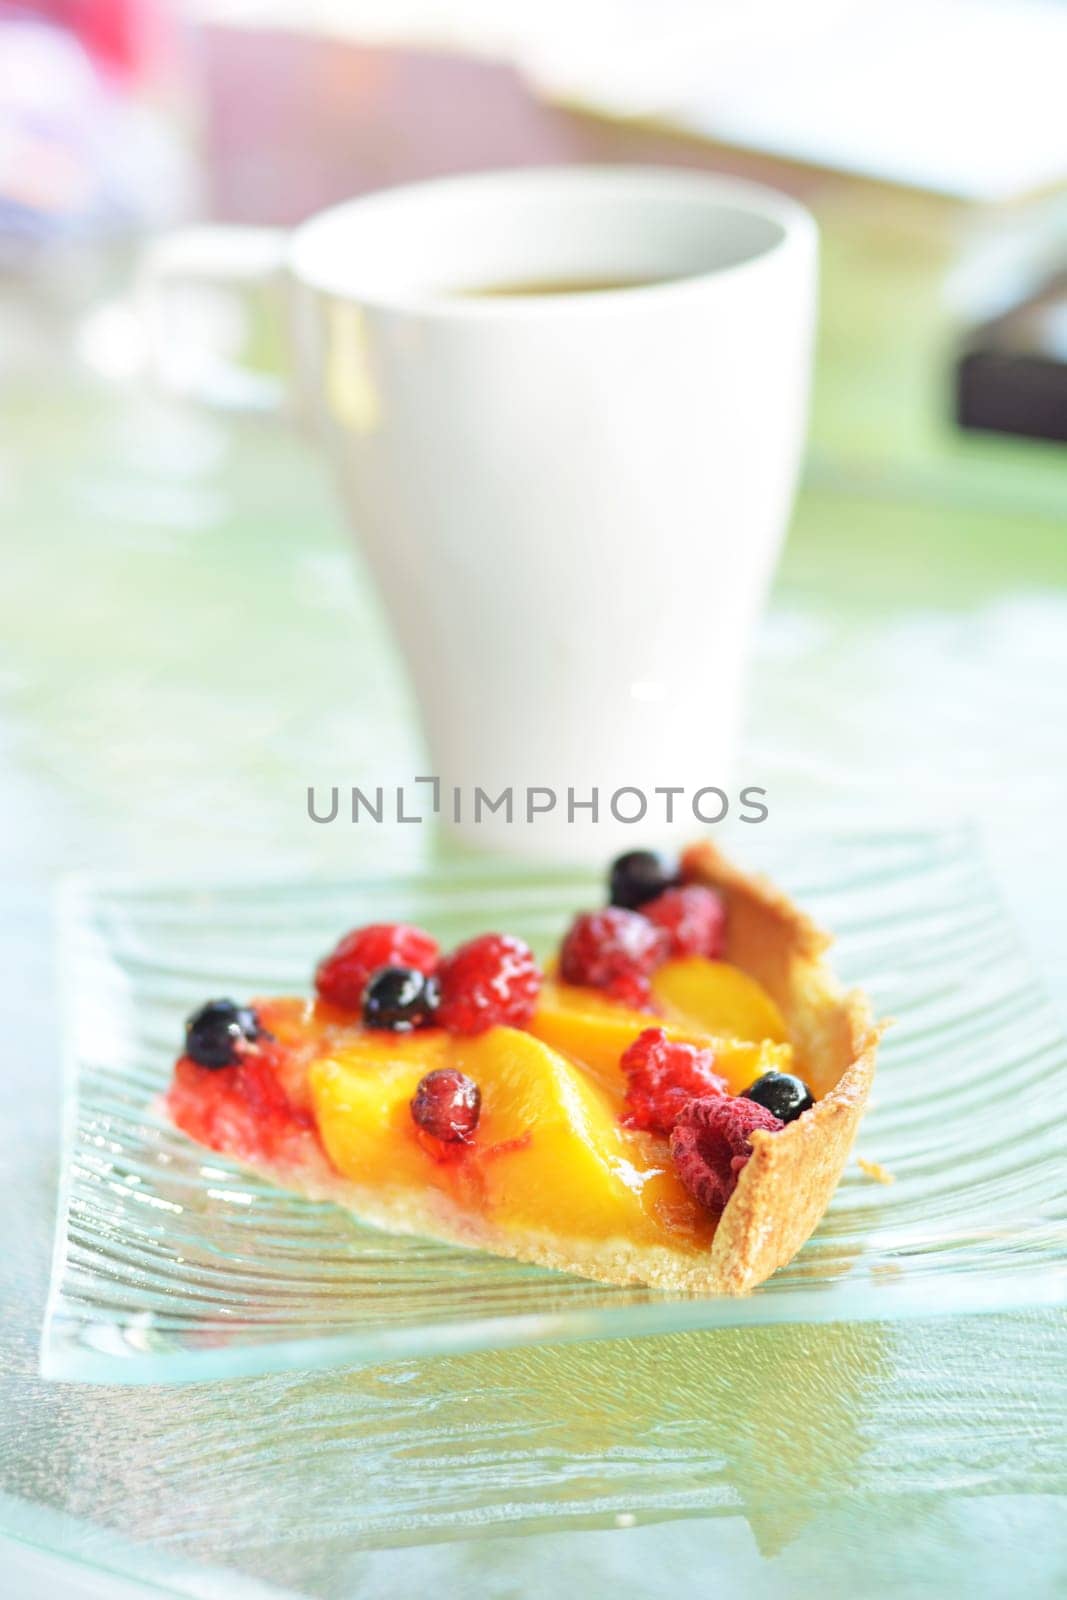 A piece of pie with peaches and berries by Godi